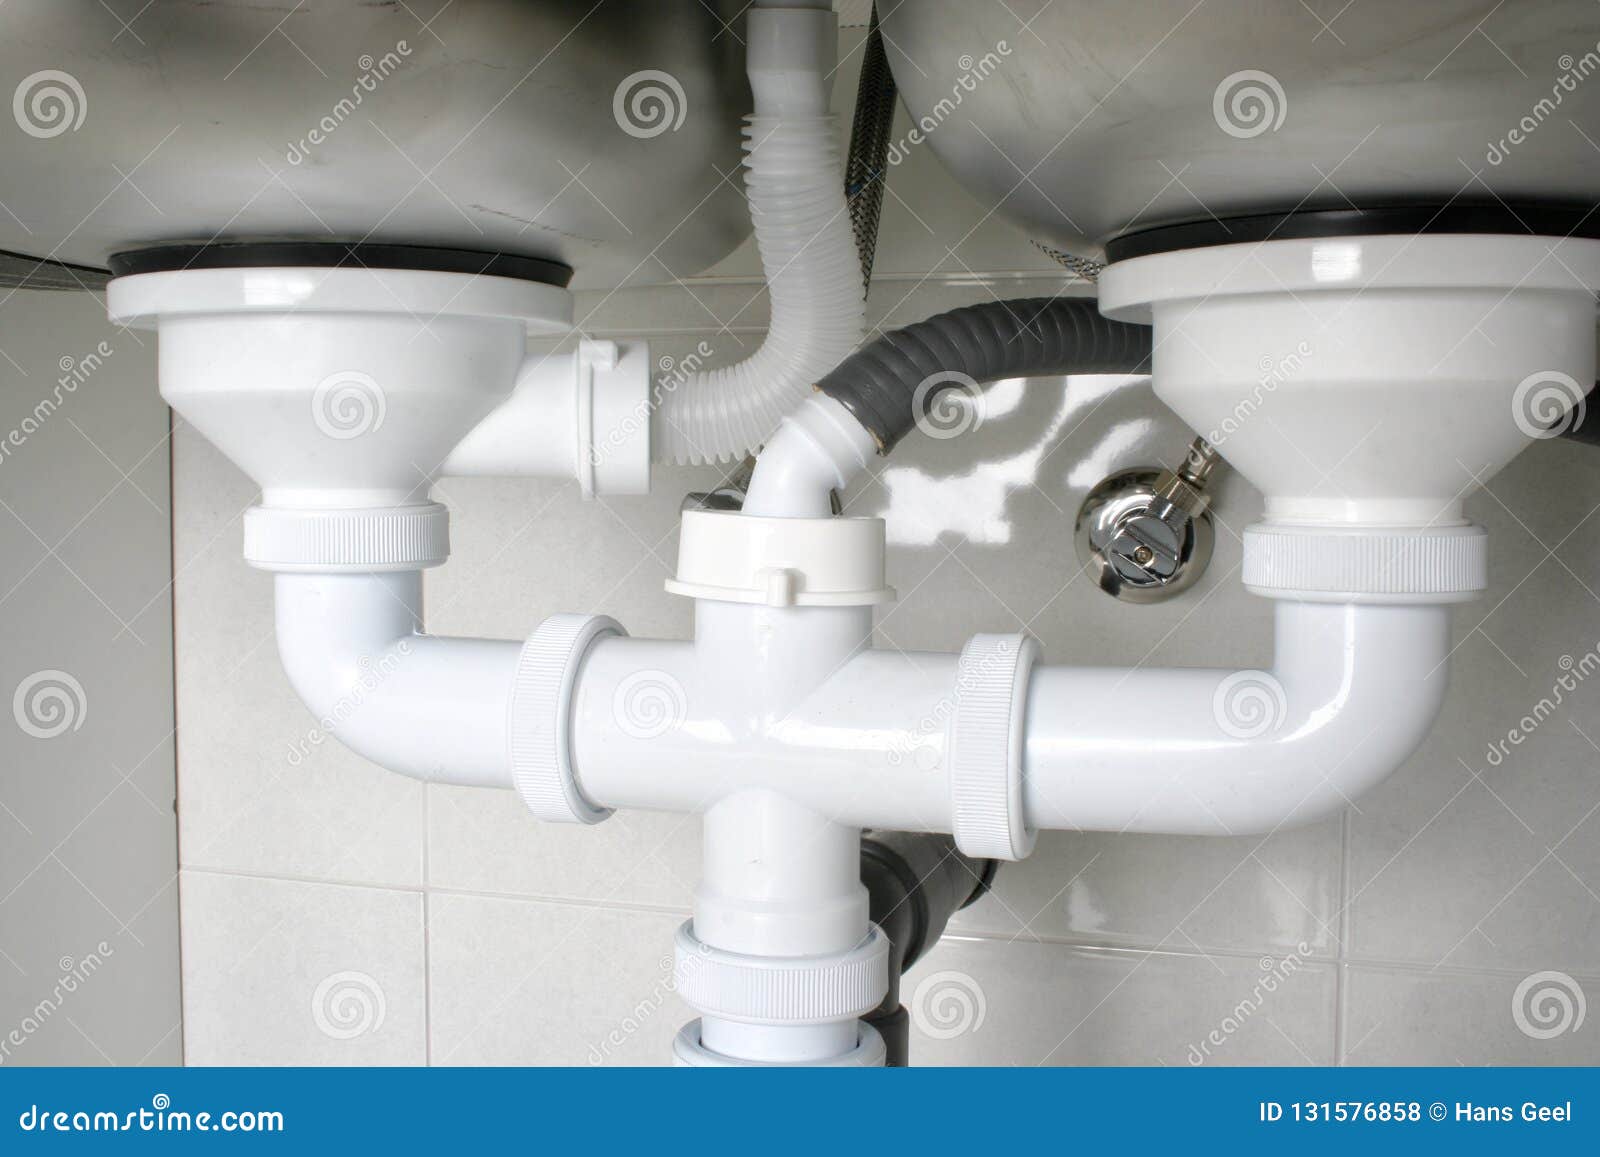 Drain Pipes Of A Kitchen Sink With Dishwasher Connection